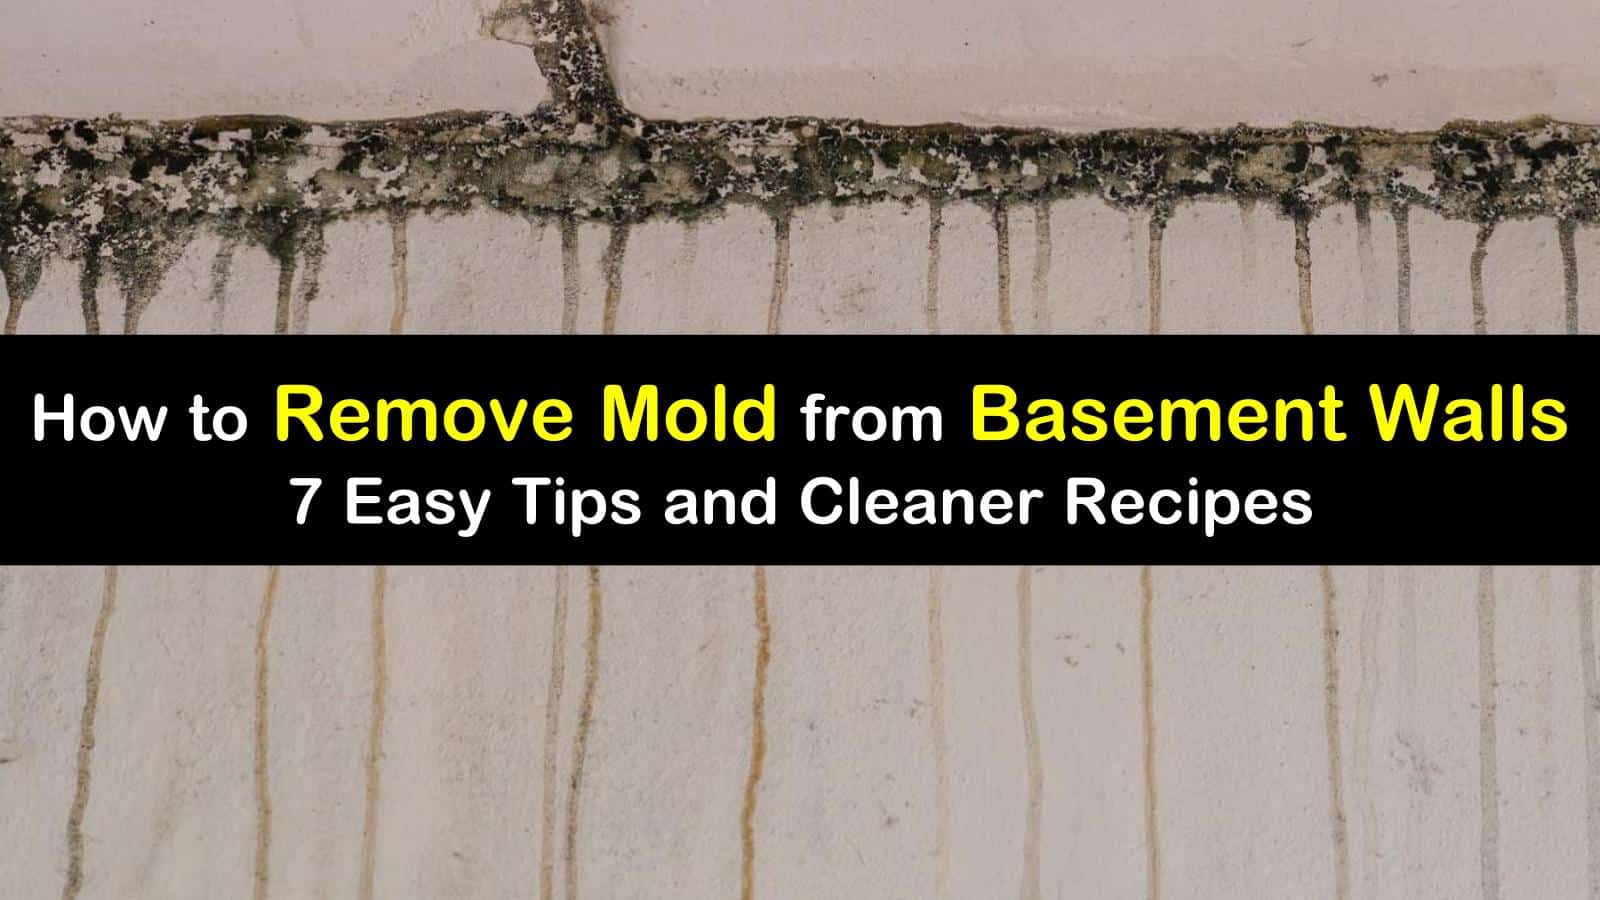 How to Remove Mold from Basement Walls